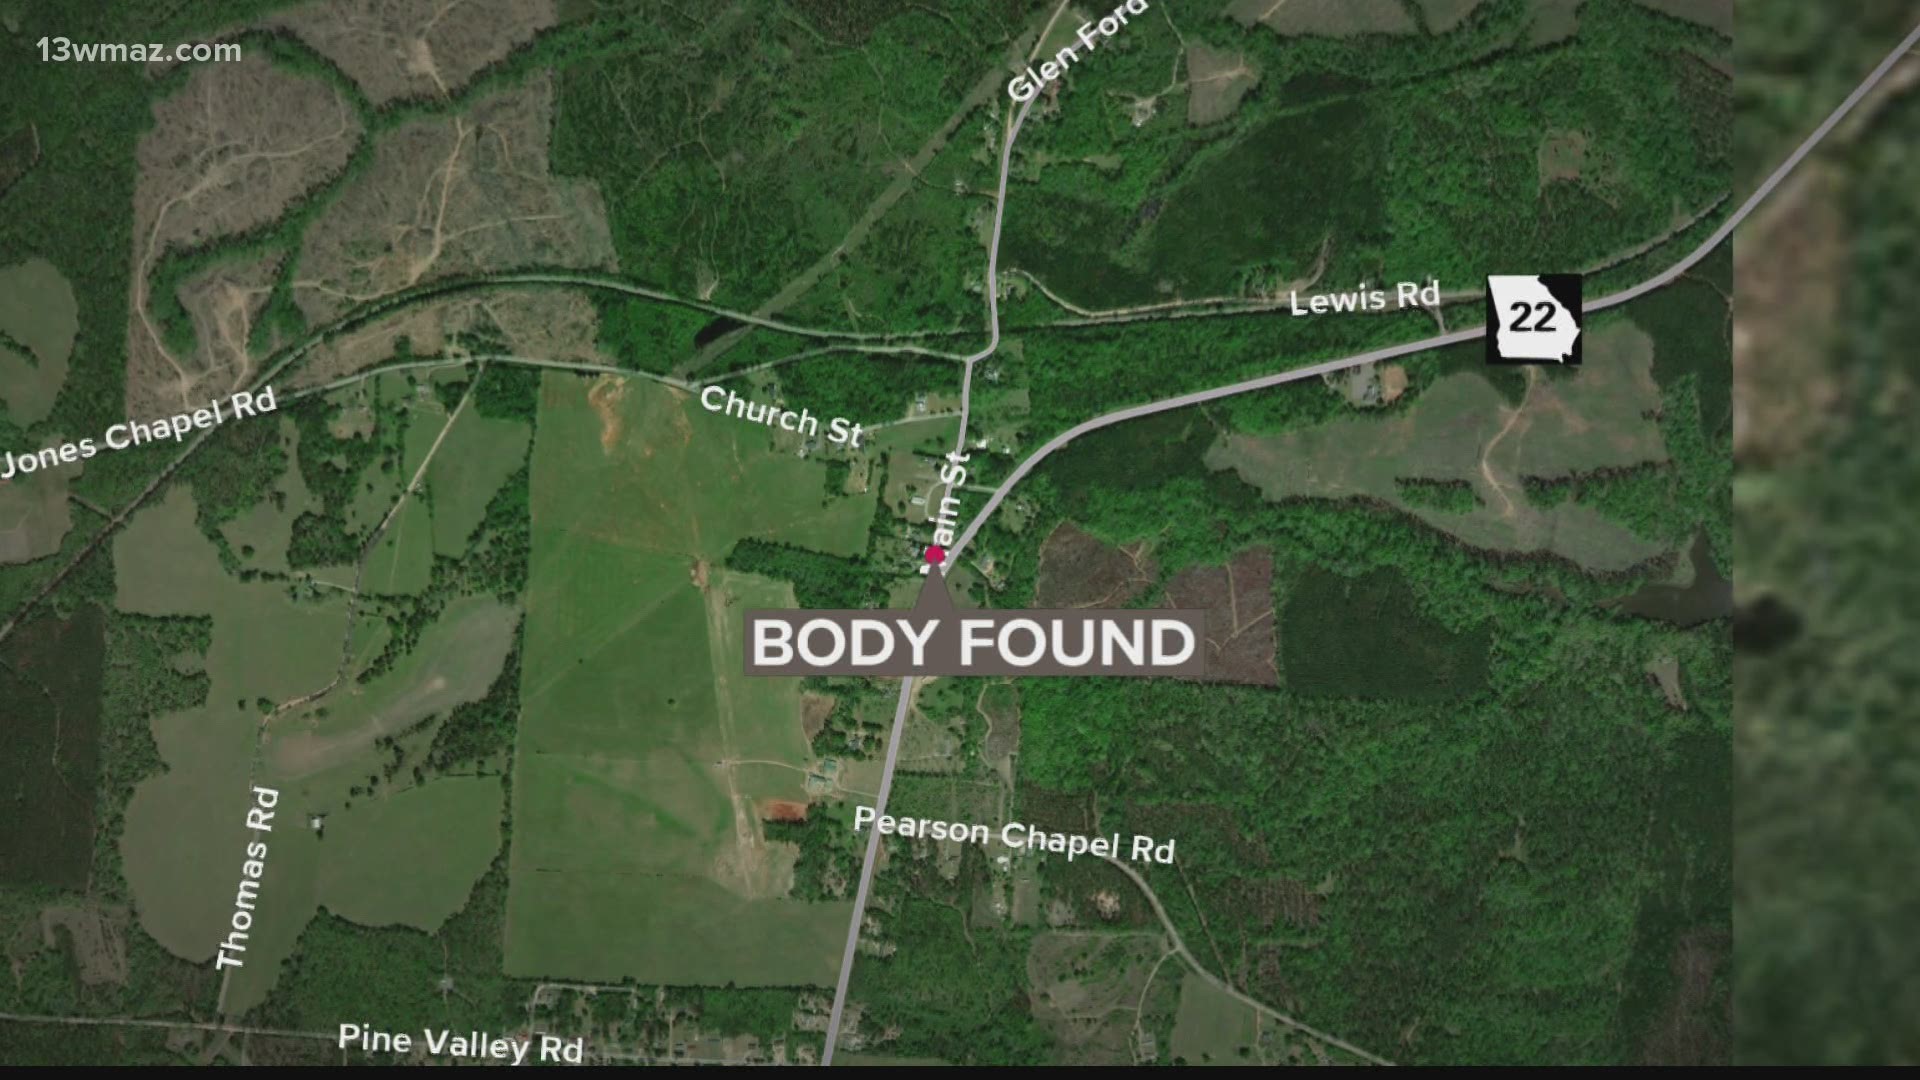 The body has not been identified at this time